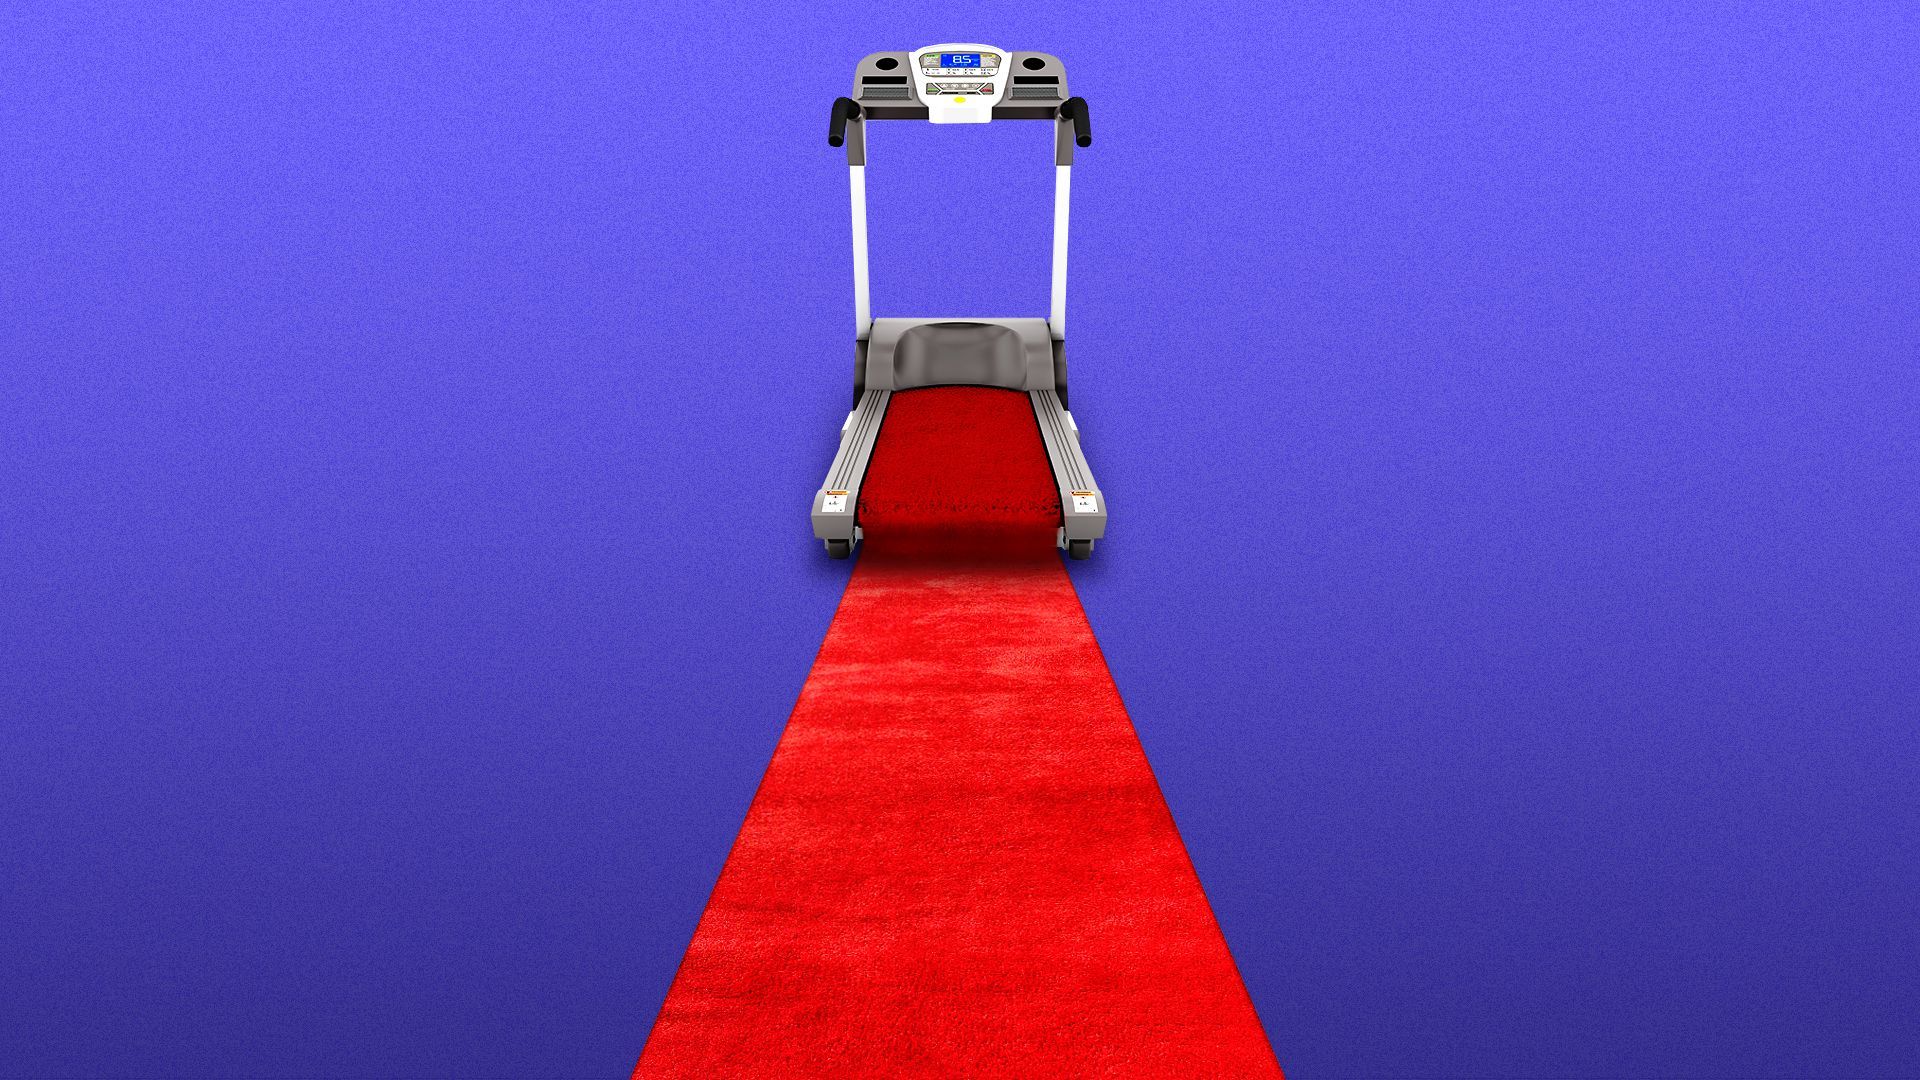 Illustration of a treadmill belt extending from the machine into a long red carpet